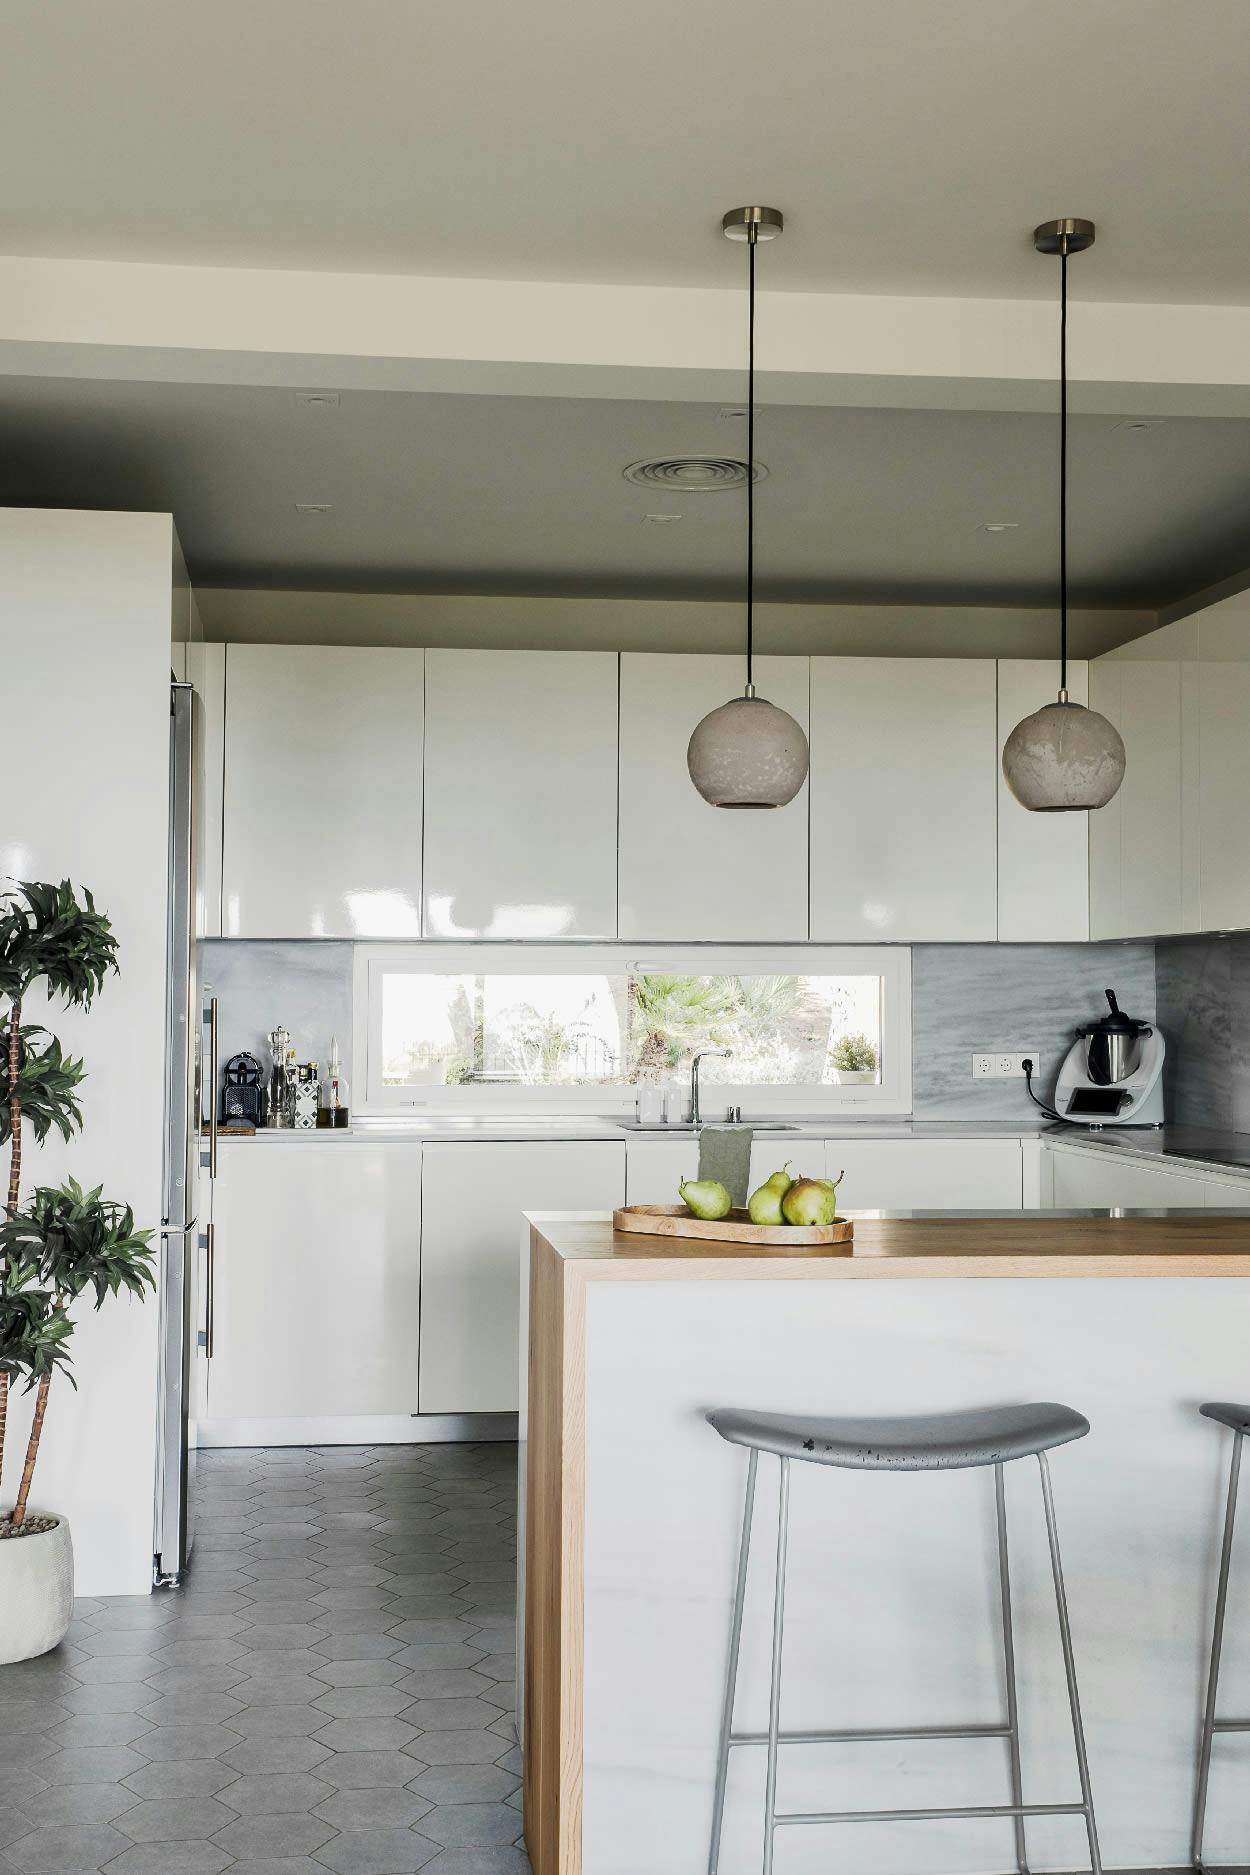 The image features a modern kitchen with white cabinets, a white countertop, and a stool.